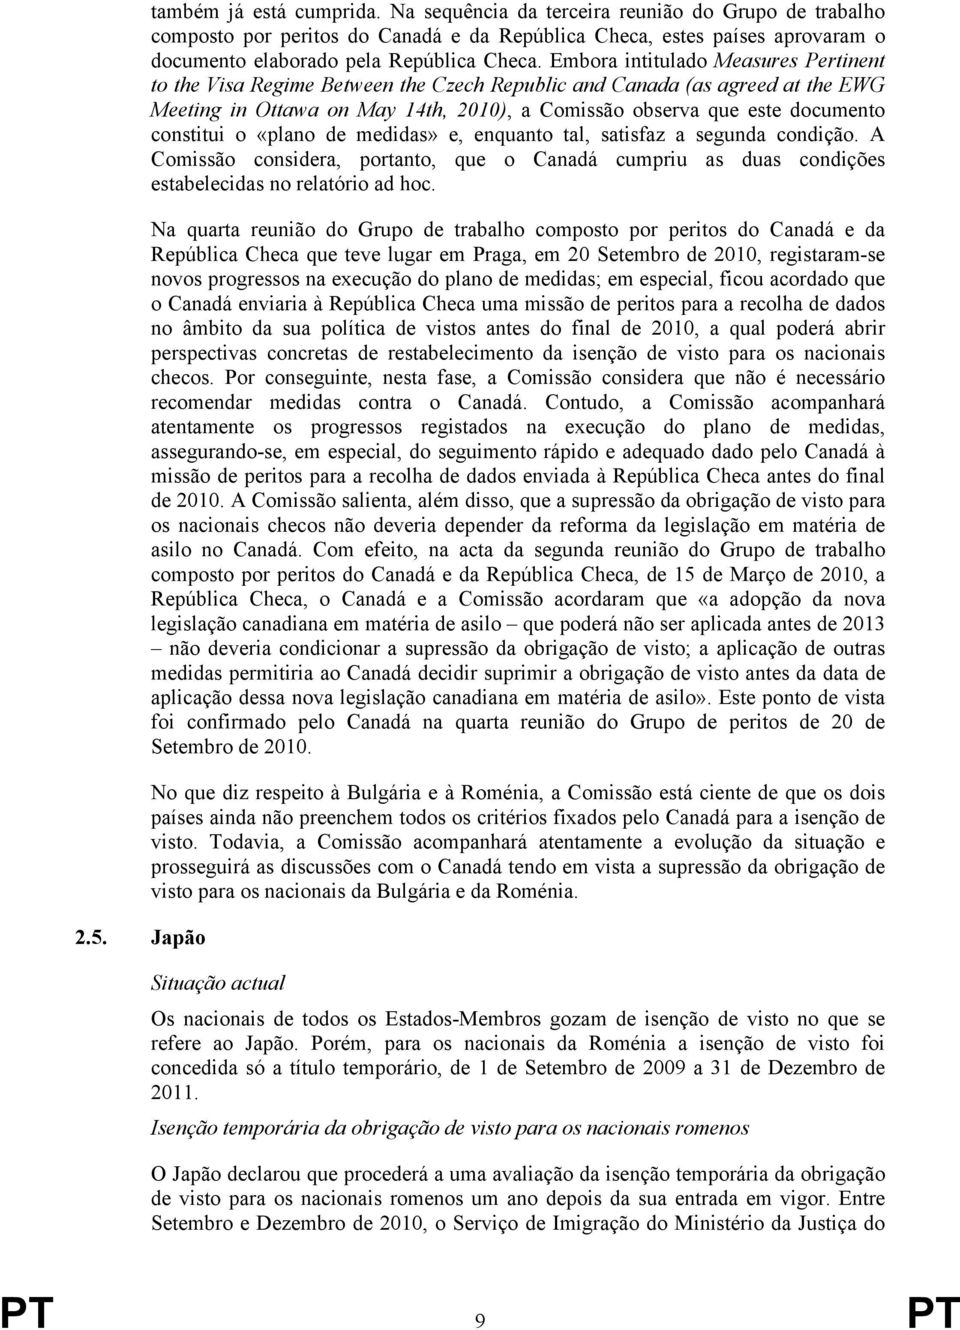 Embora intitulado Measures Pertinent to the Visa Regime Between the Czech Republic and Canada (as agreed at the EWG Meeting in Ottawa on May 14th, 2010), a Comissão observa que este documento